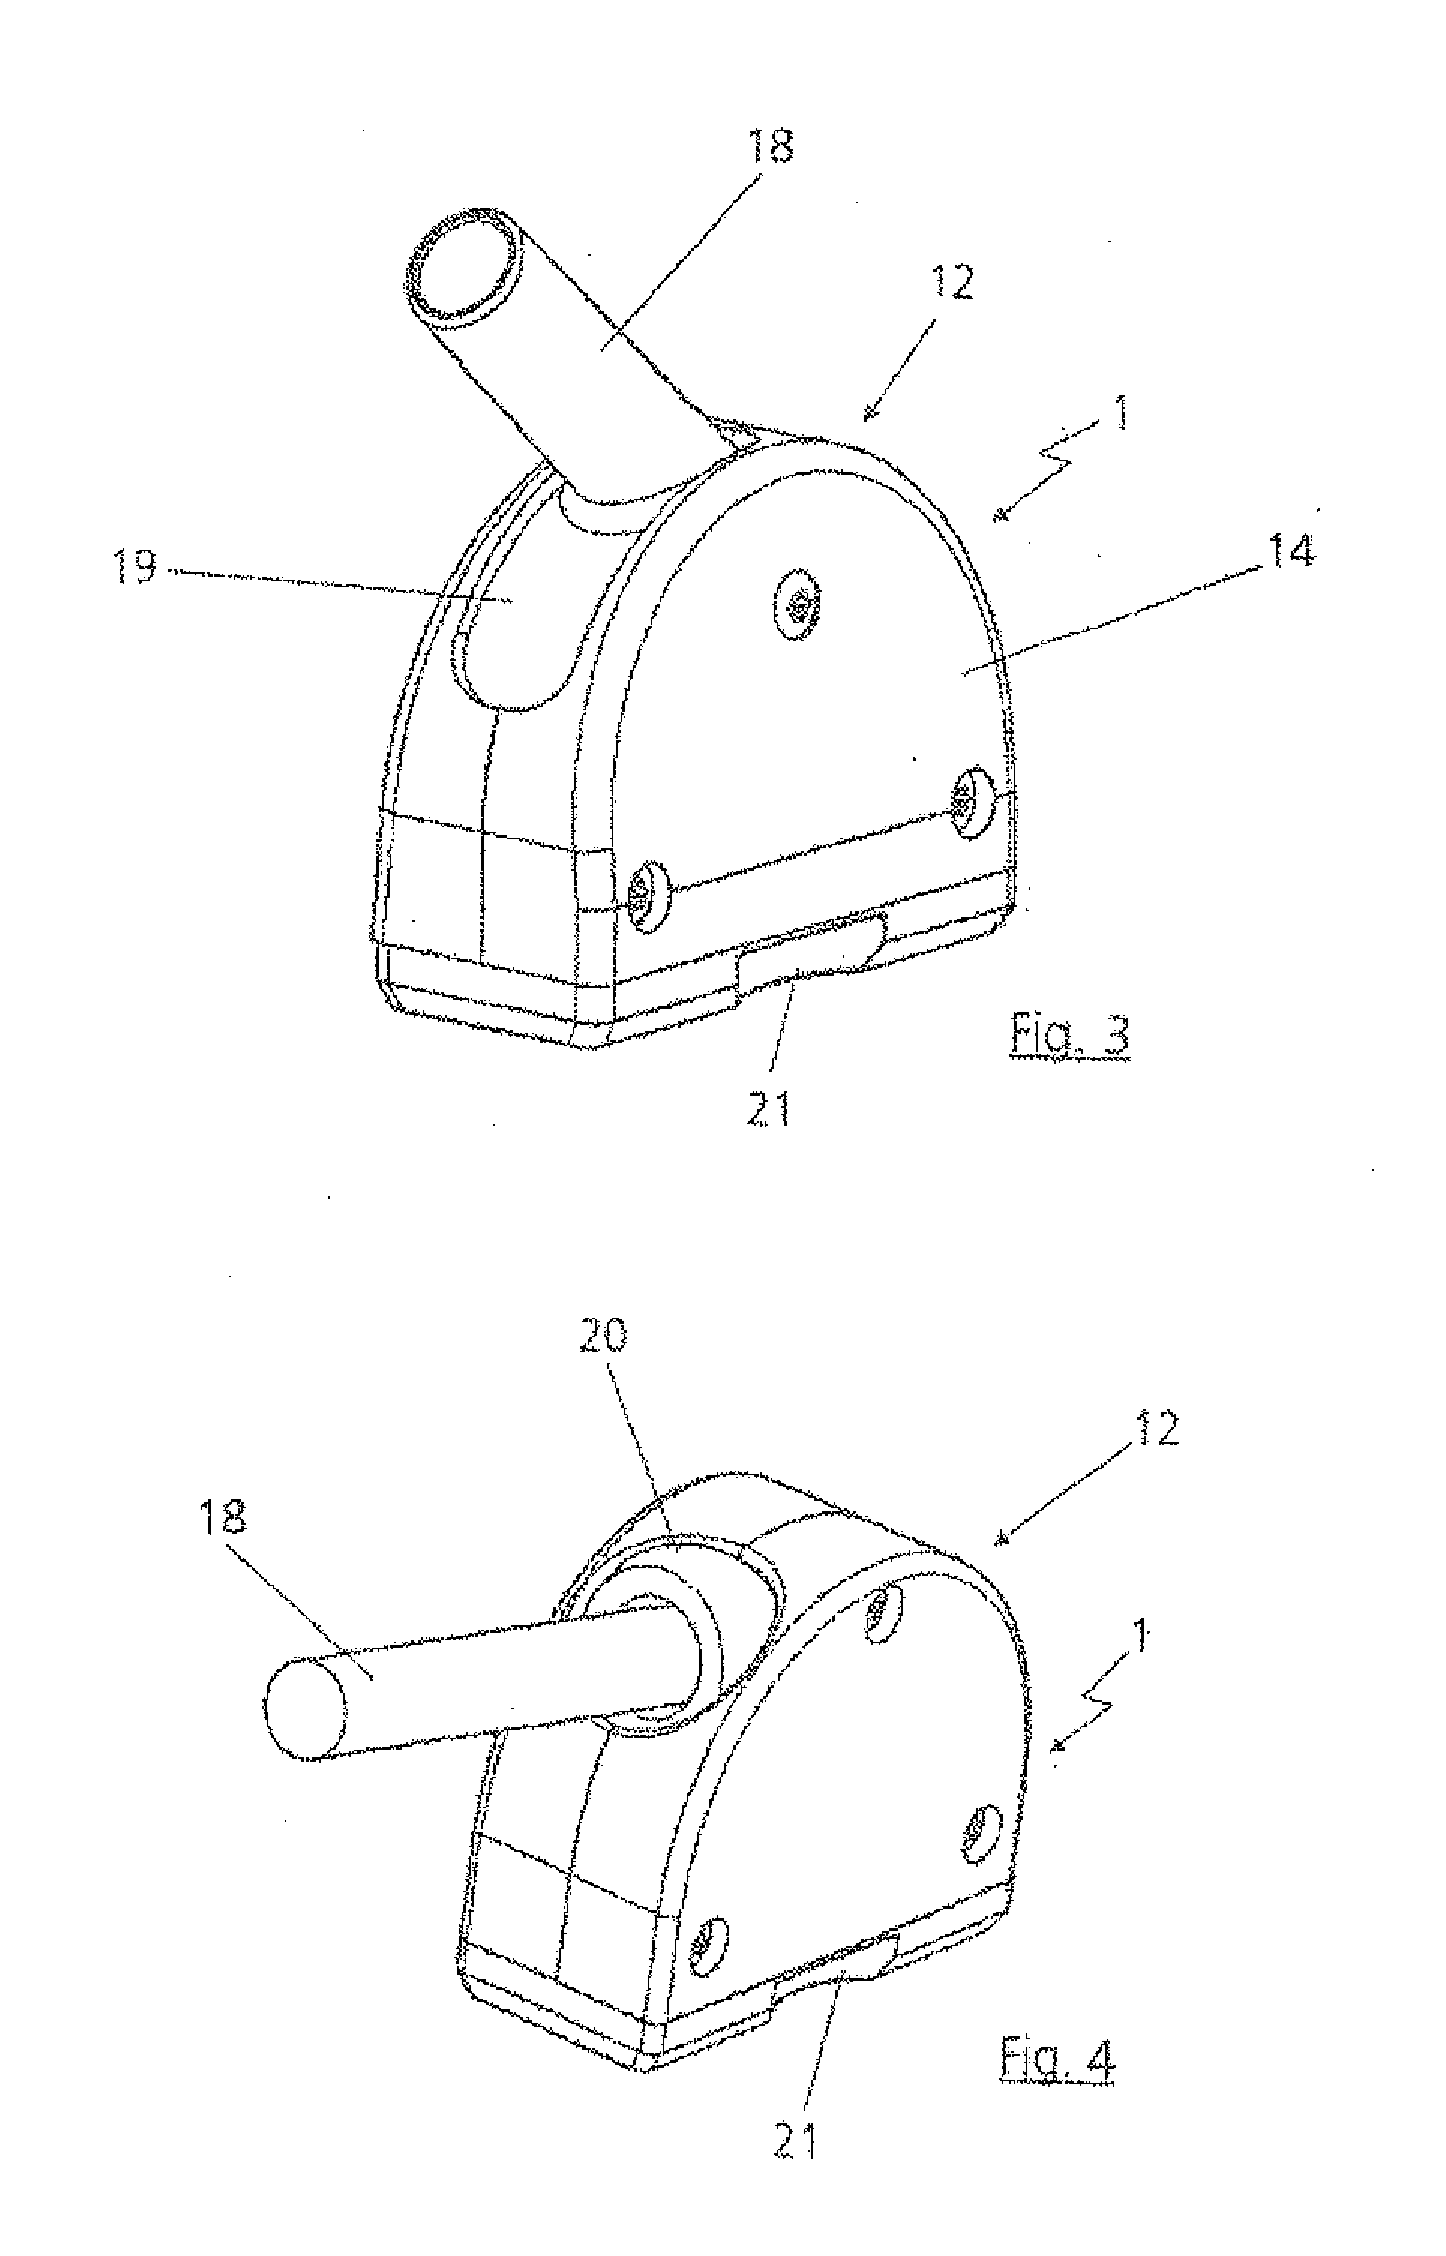 Electrical connection system